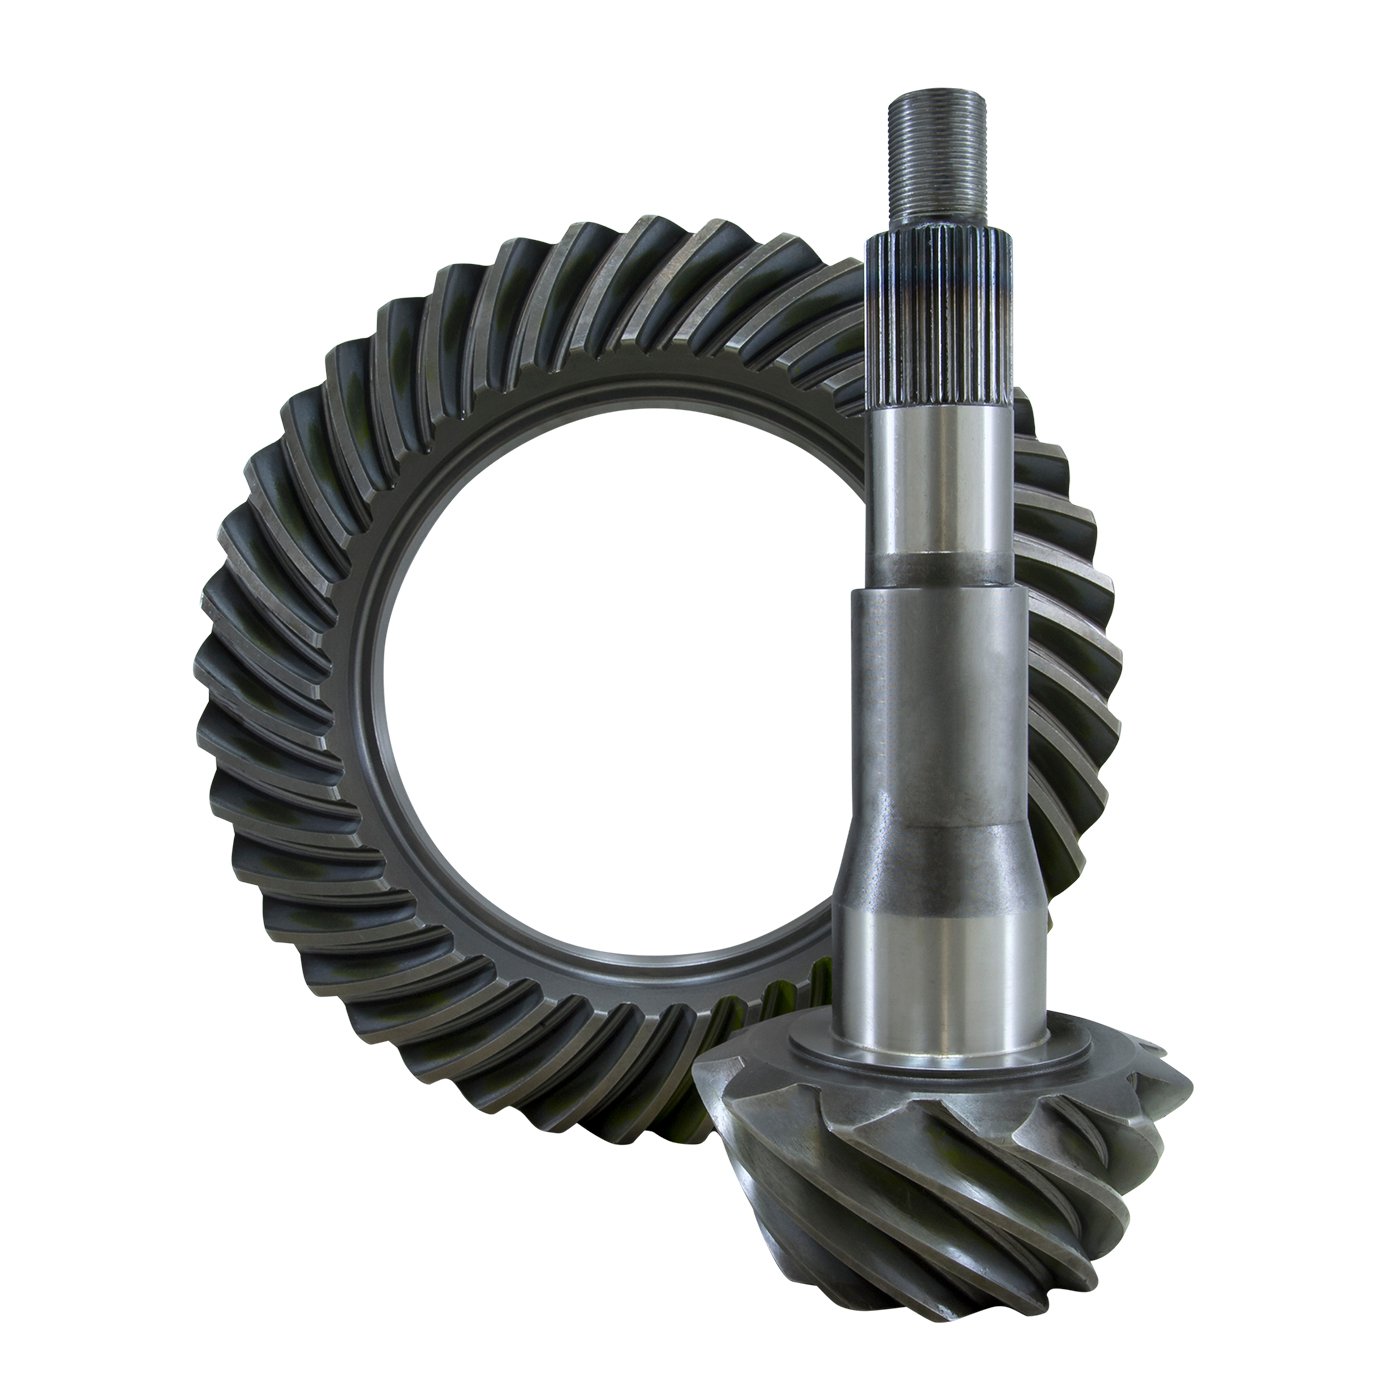 USA Standard 36275 Ring & Pinion Gear Set, For '10 & Down Ford 10.5 in., 4.56 Ratio.